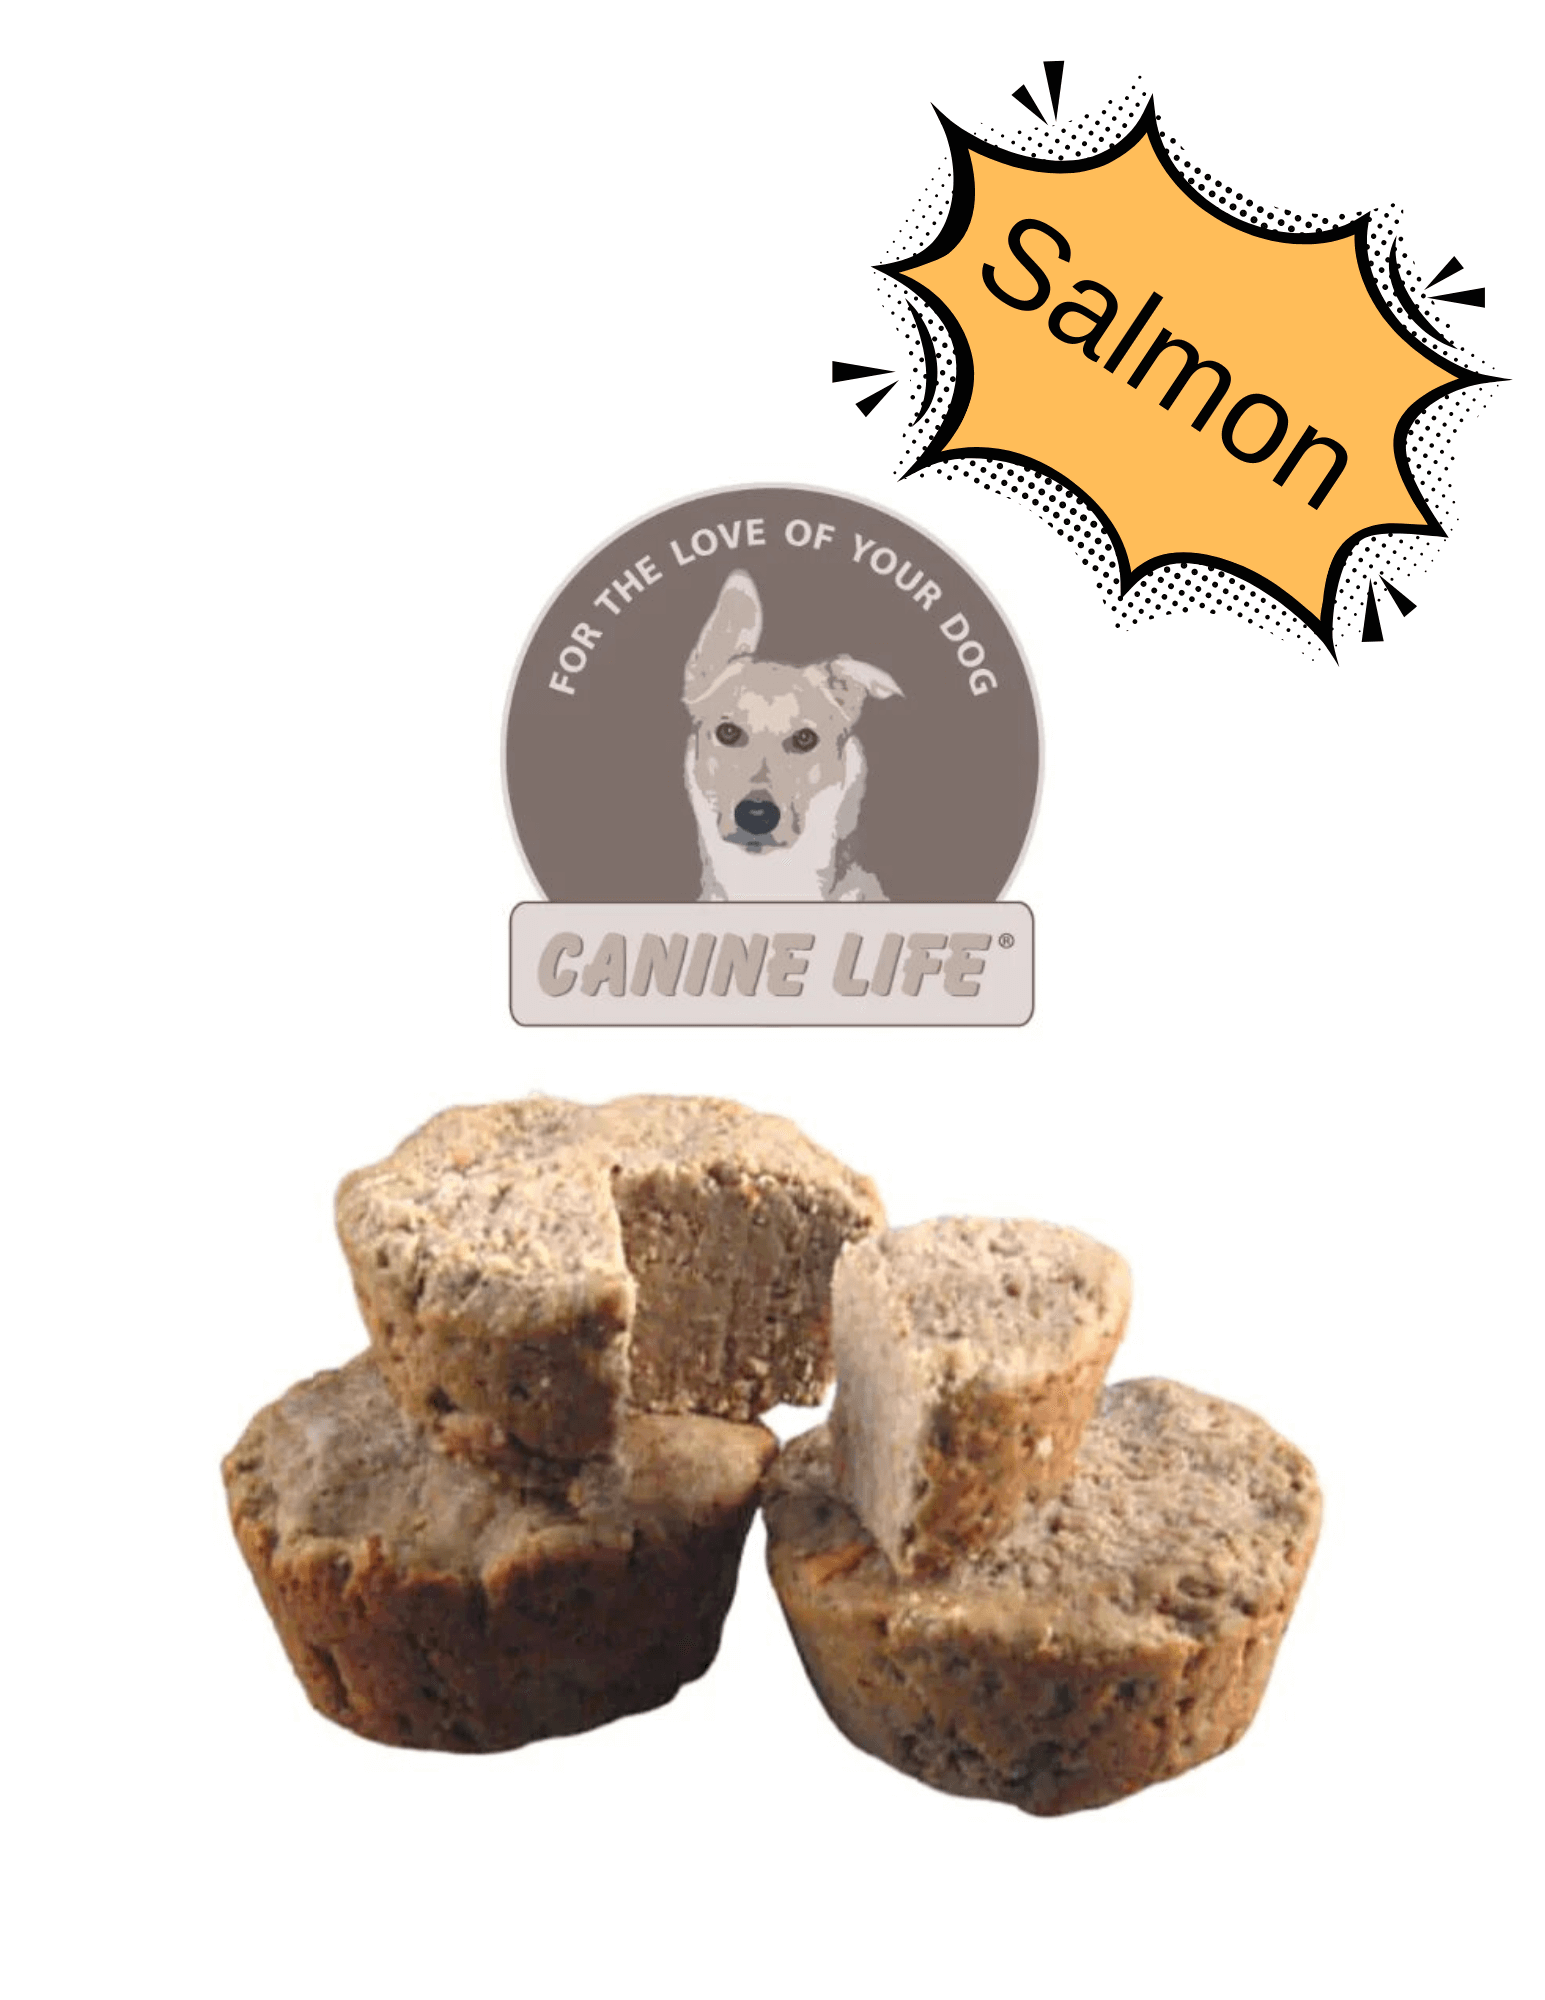 Canine Life - Salmon Recipe (For Dogs) - Frozen Product